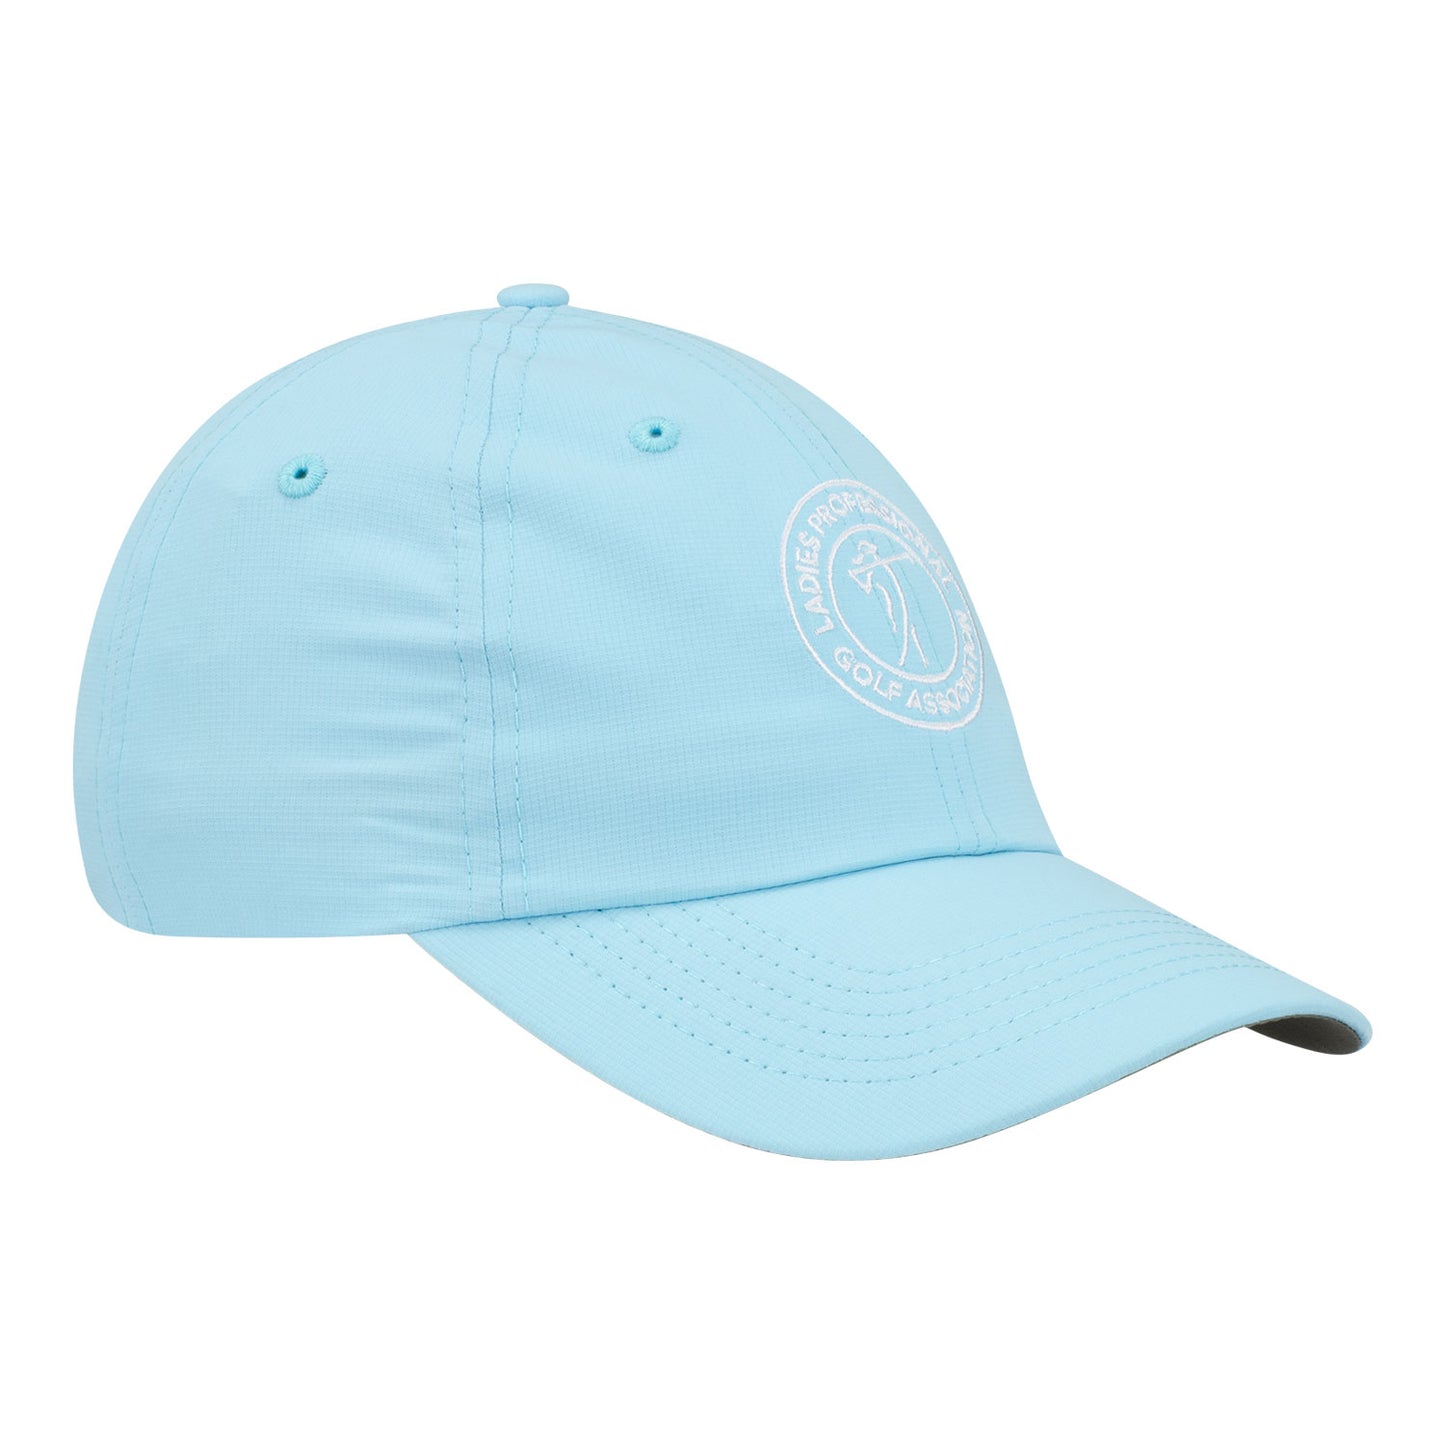 Imperial 2023 LPGA Women's Hat in Blue - Angled Right Side View